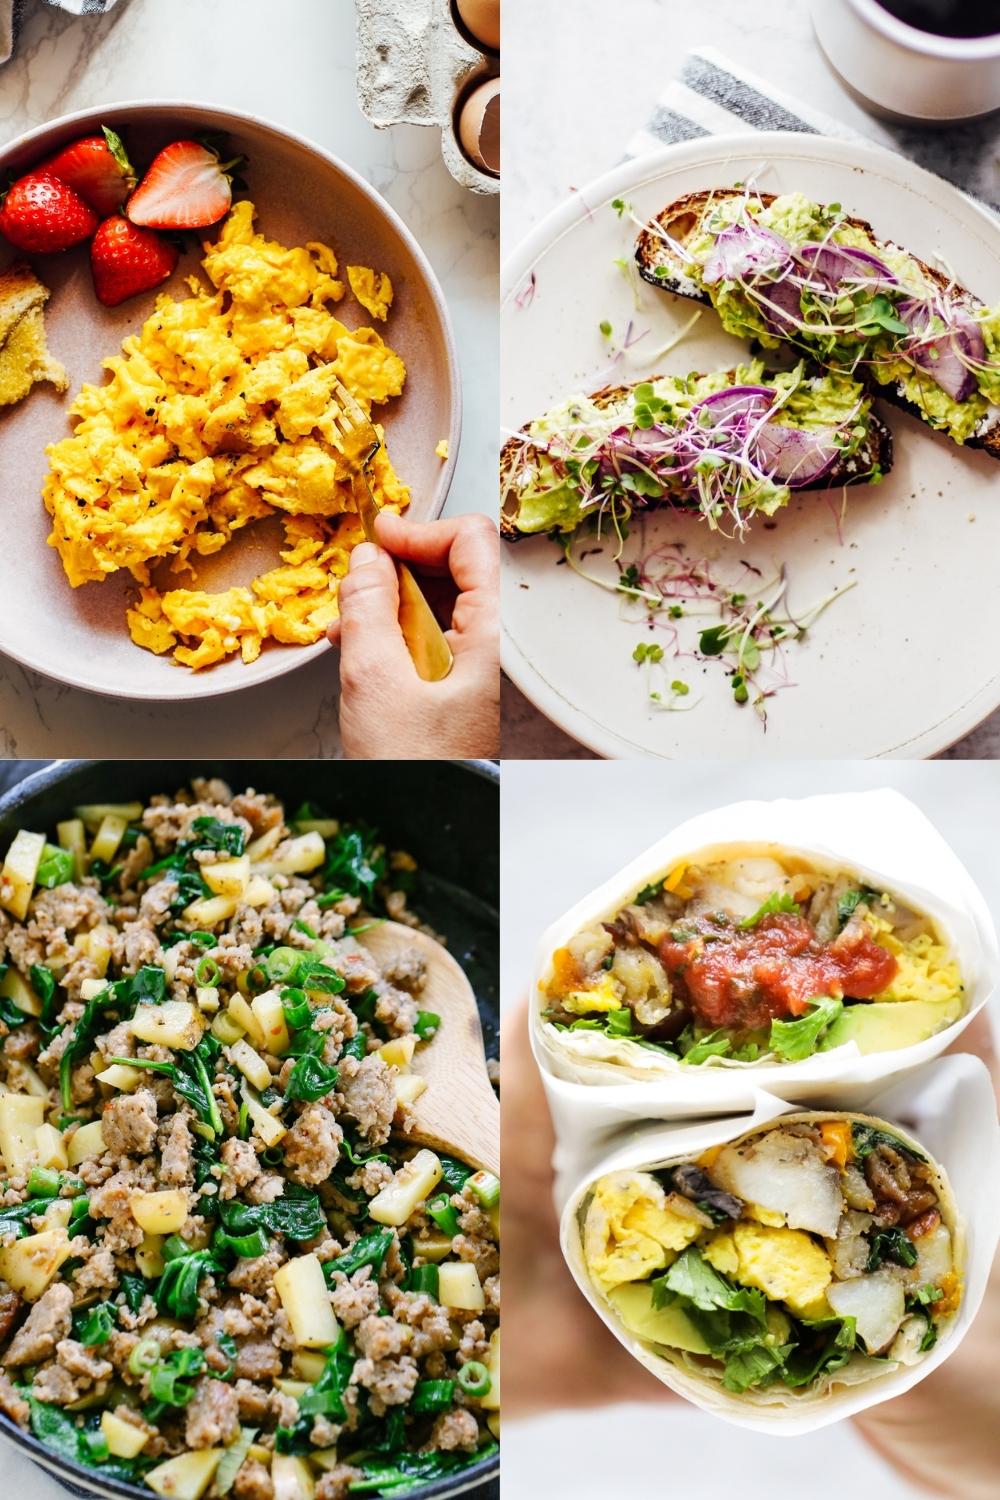 What to Eat With Scrambled Eggs? 19 Delicious Ideas